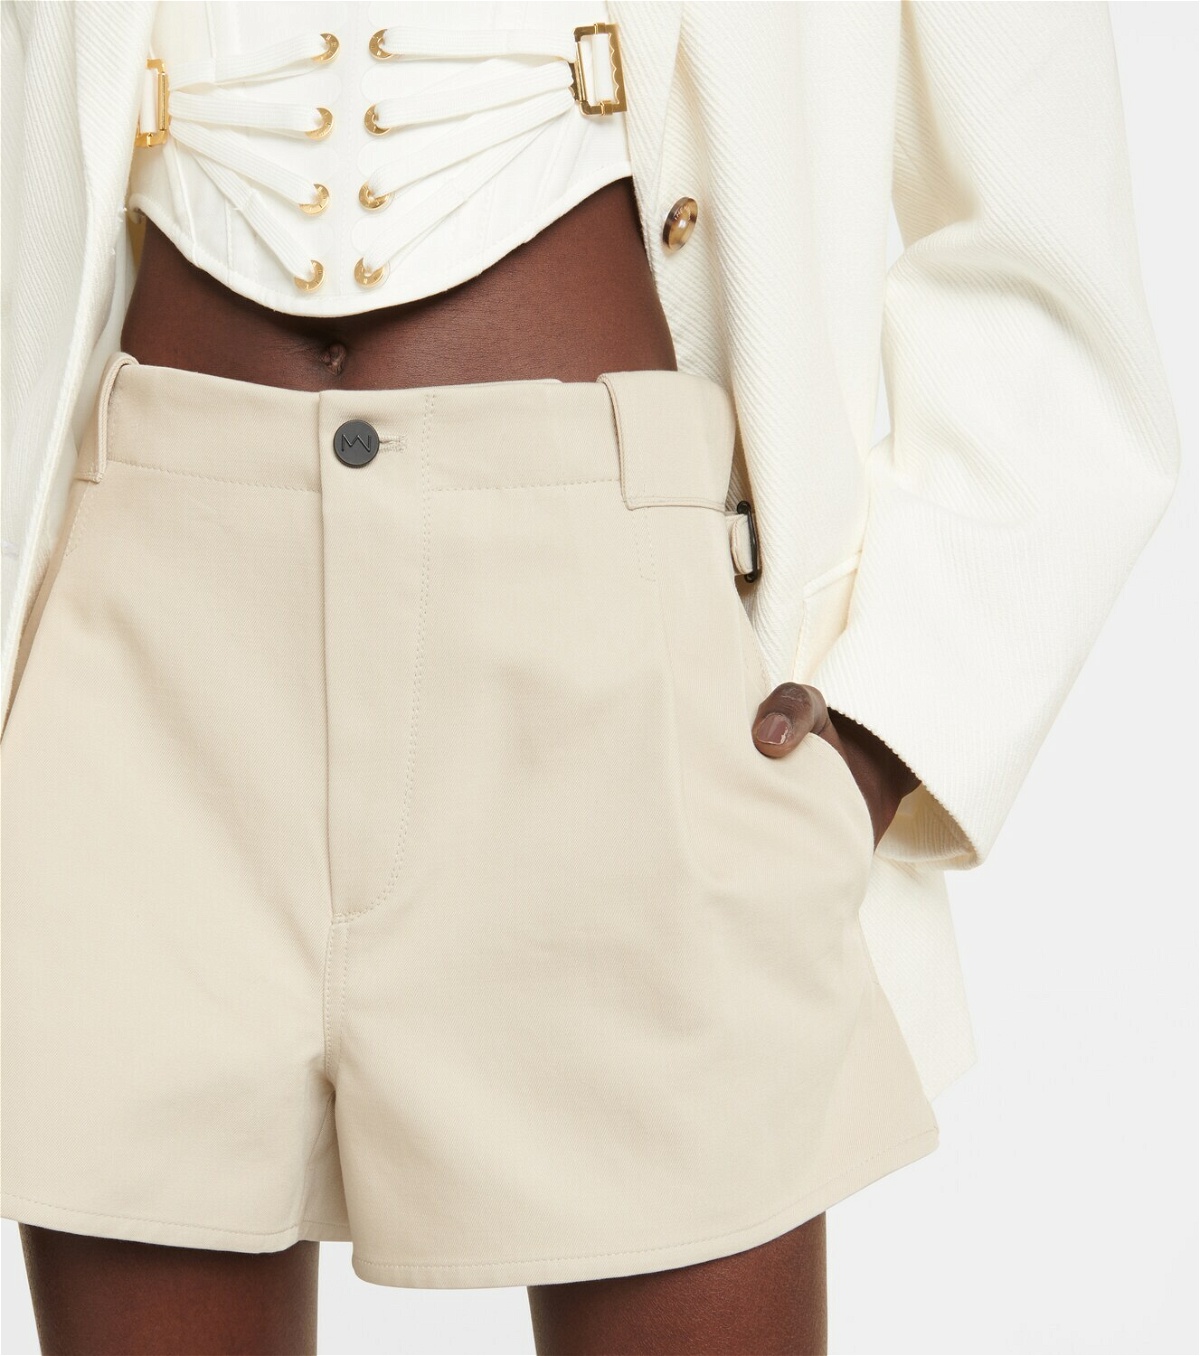 The Mannei Cannes high-rise cotton shorts